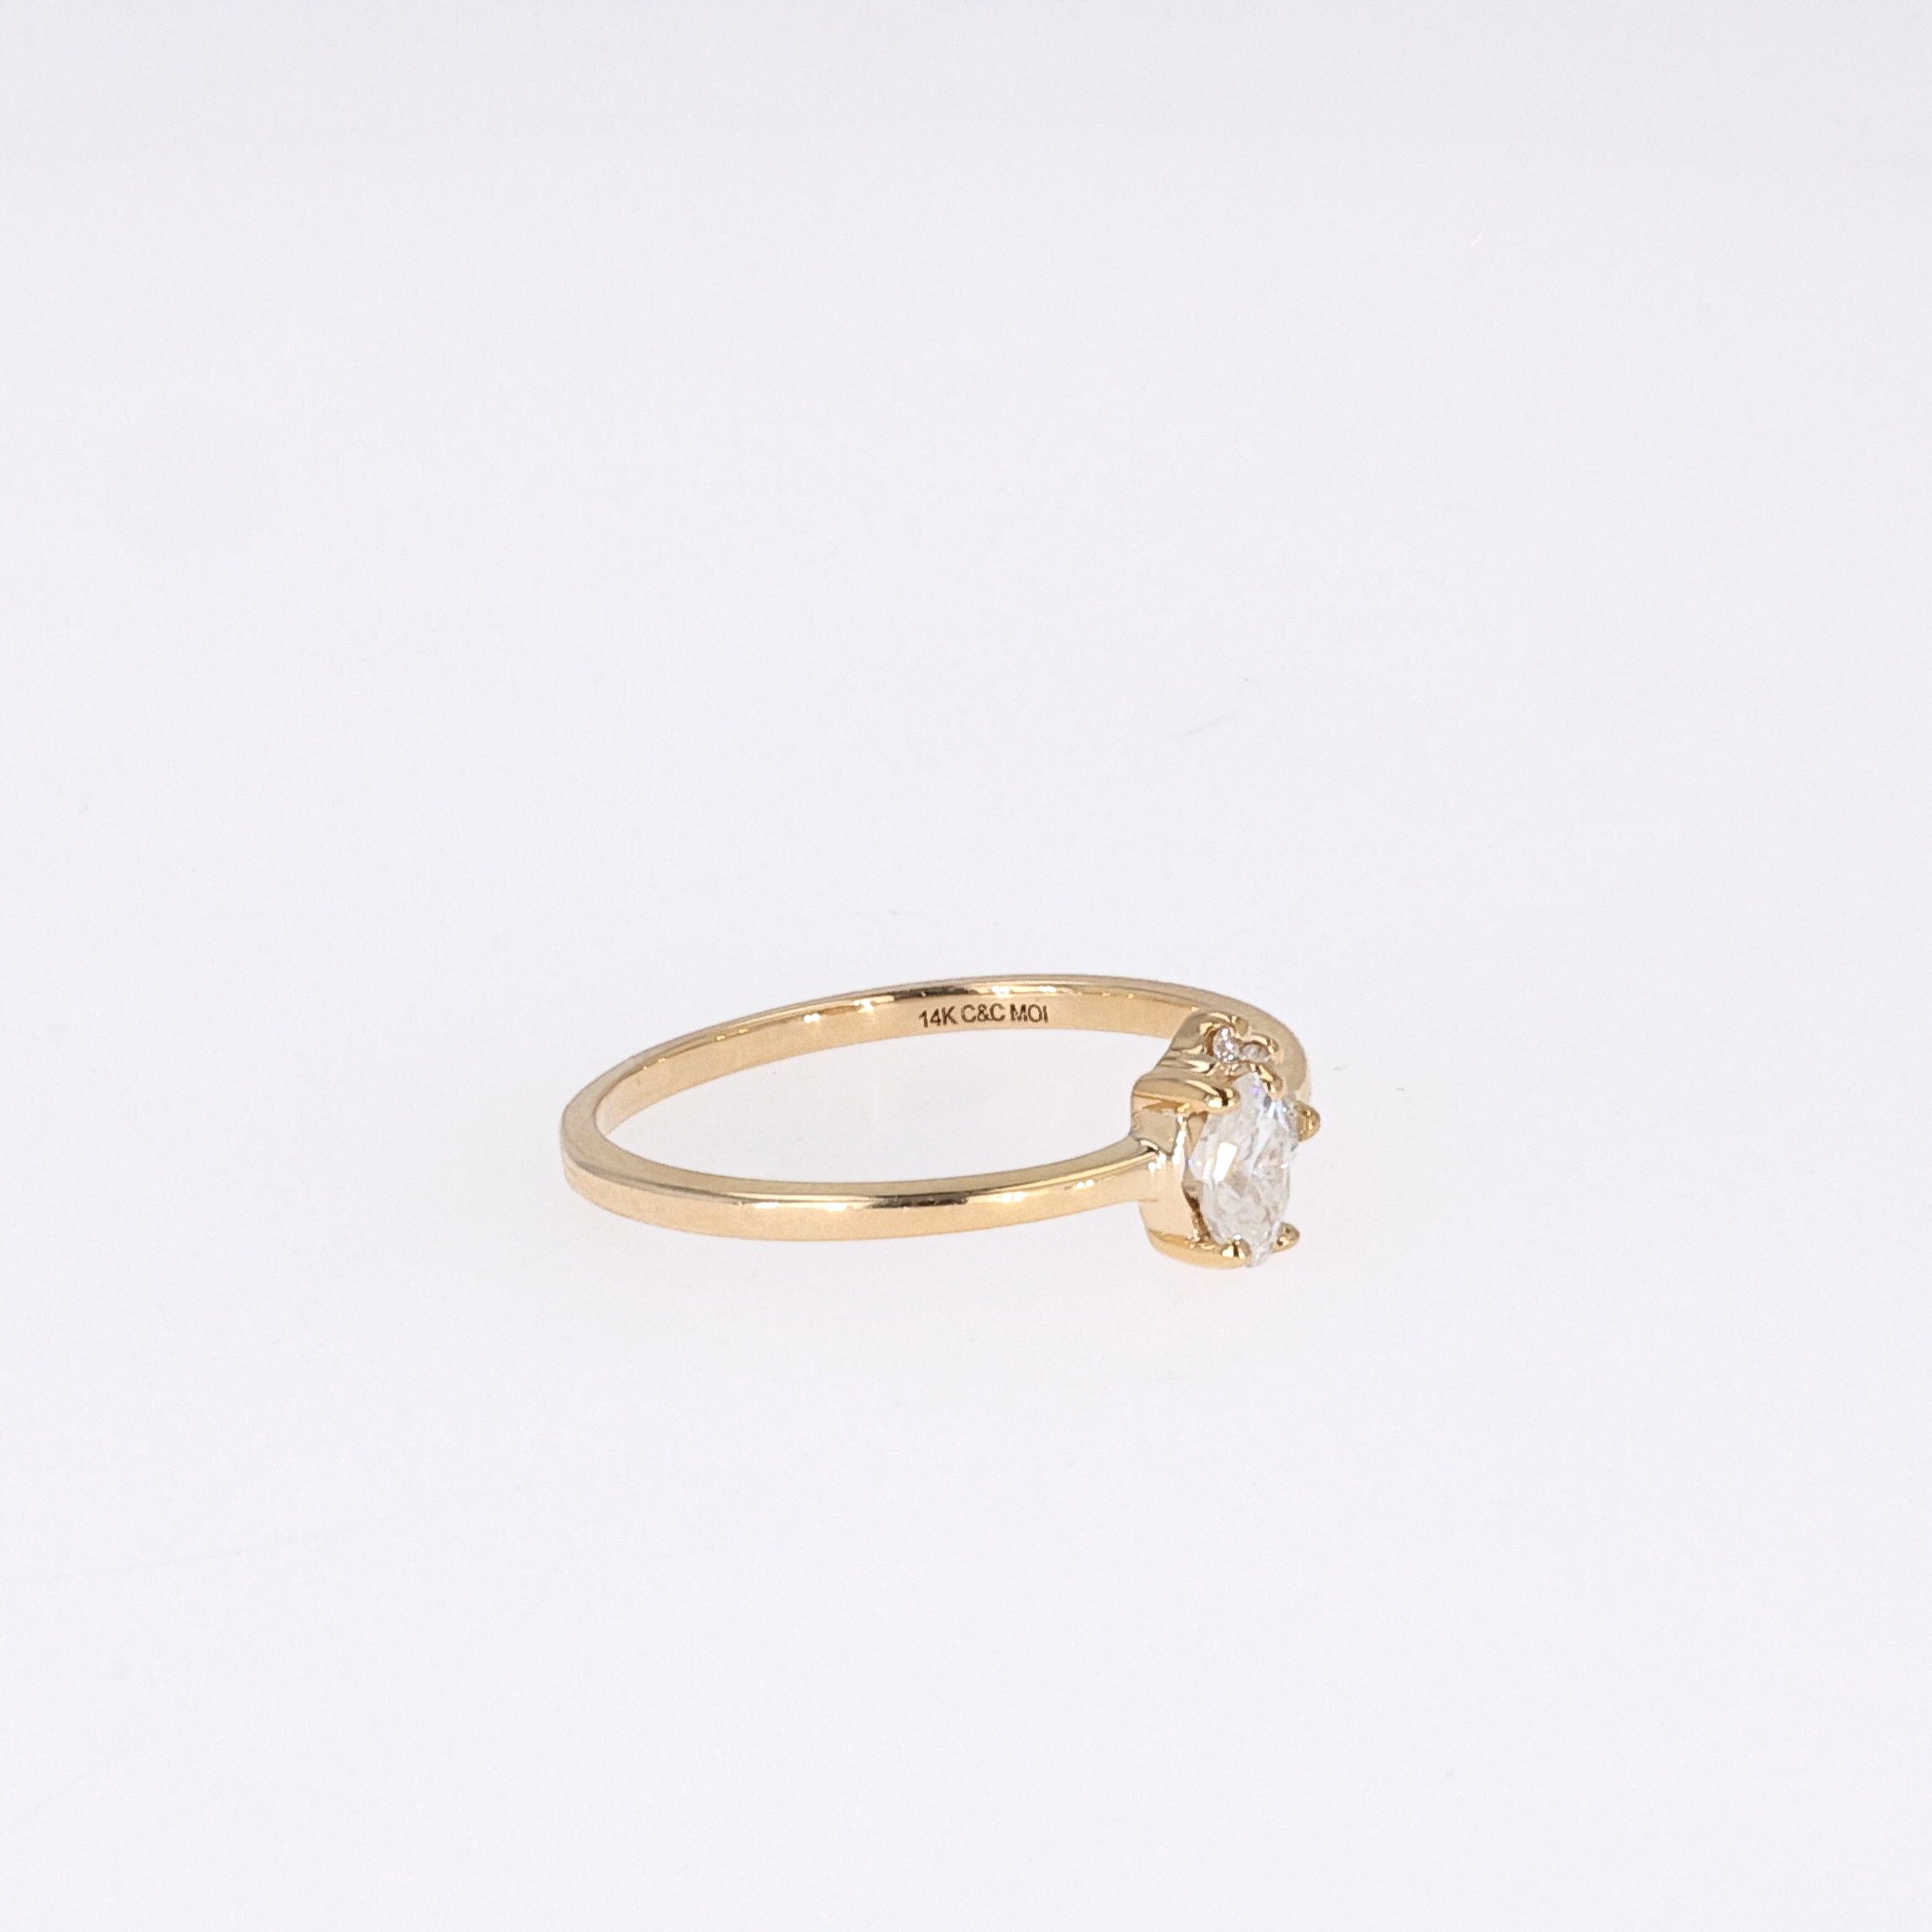 0.31 CTW DEW Oval Near-Colorless Moissanite Fashion Ring in 14K Yellow Gold